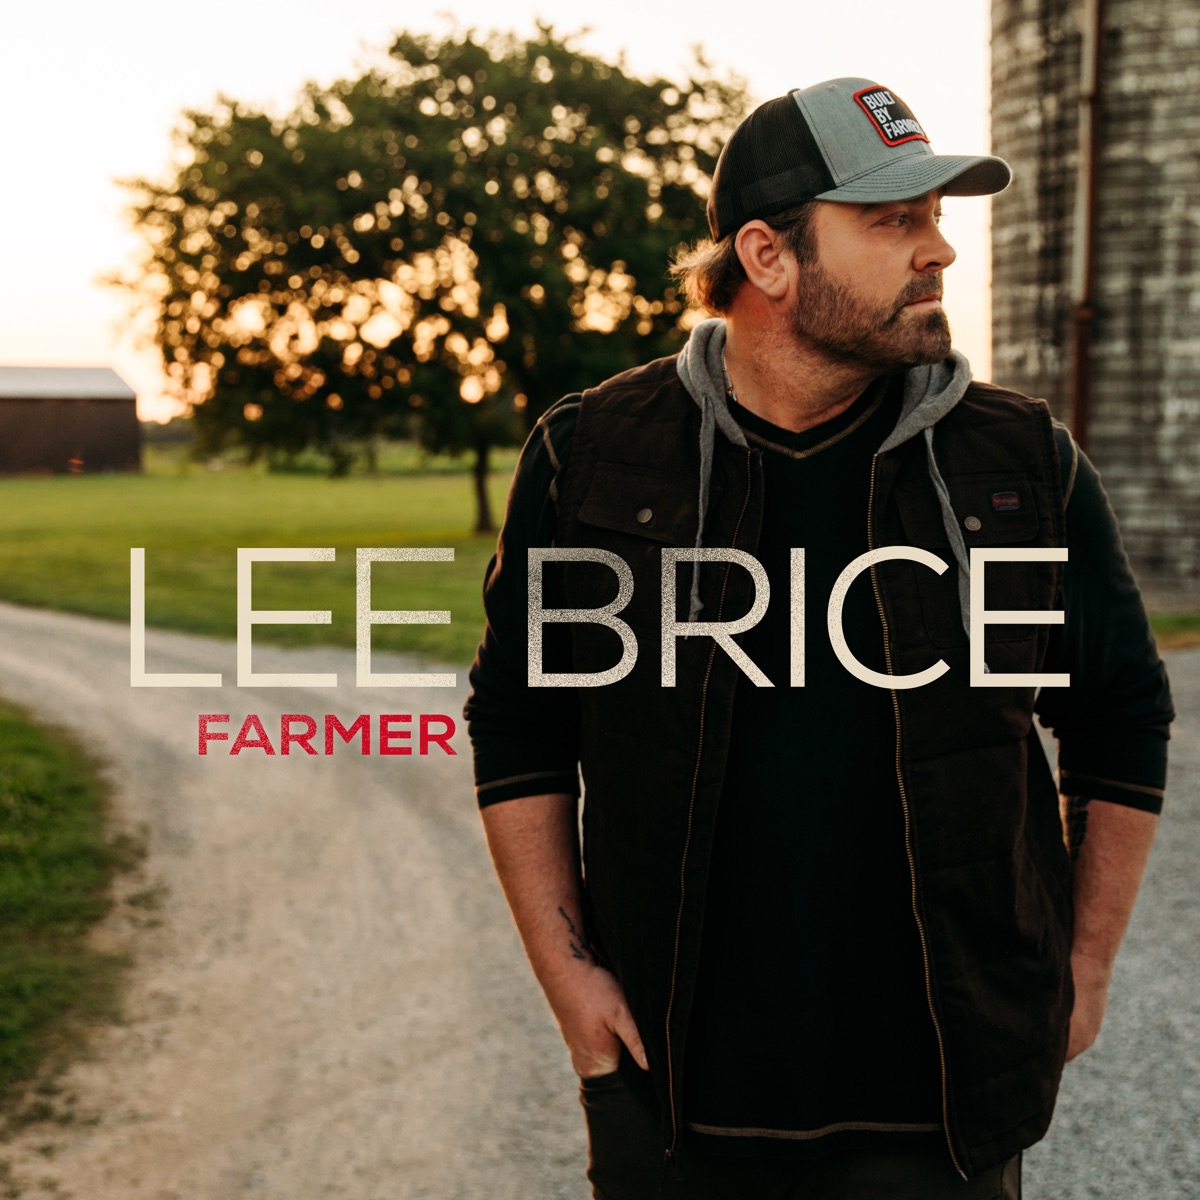 Santa Claus Was My Uber Driver - Single by Lee Brice on Apple Music